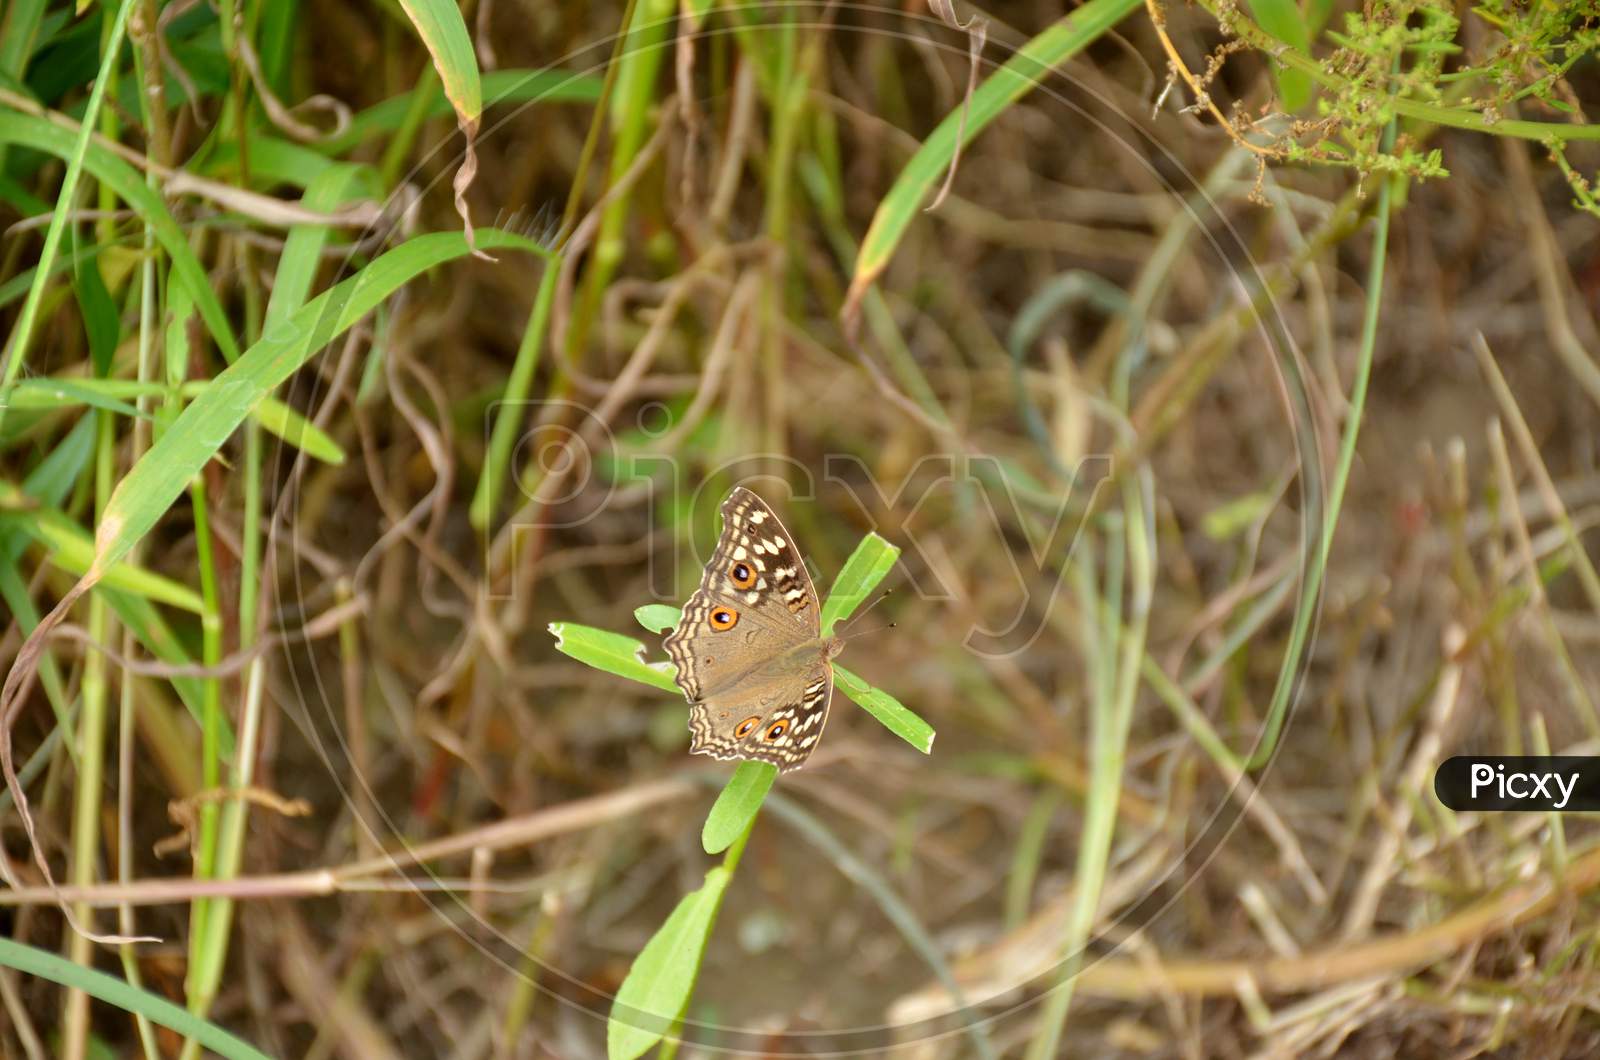 The Small Beautiful Brown Butterfly Hold On Grass Plant.